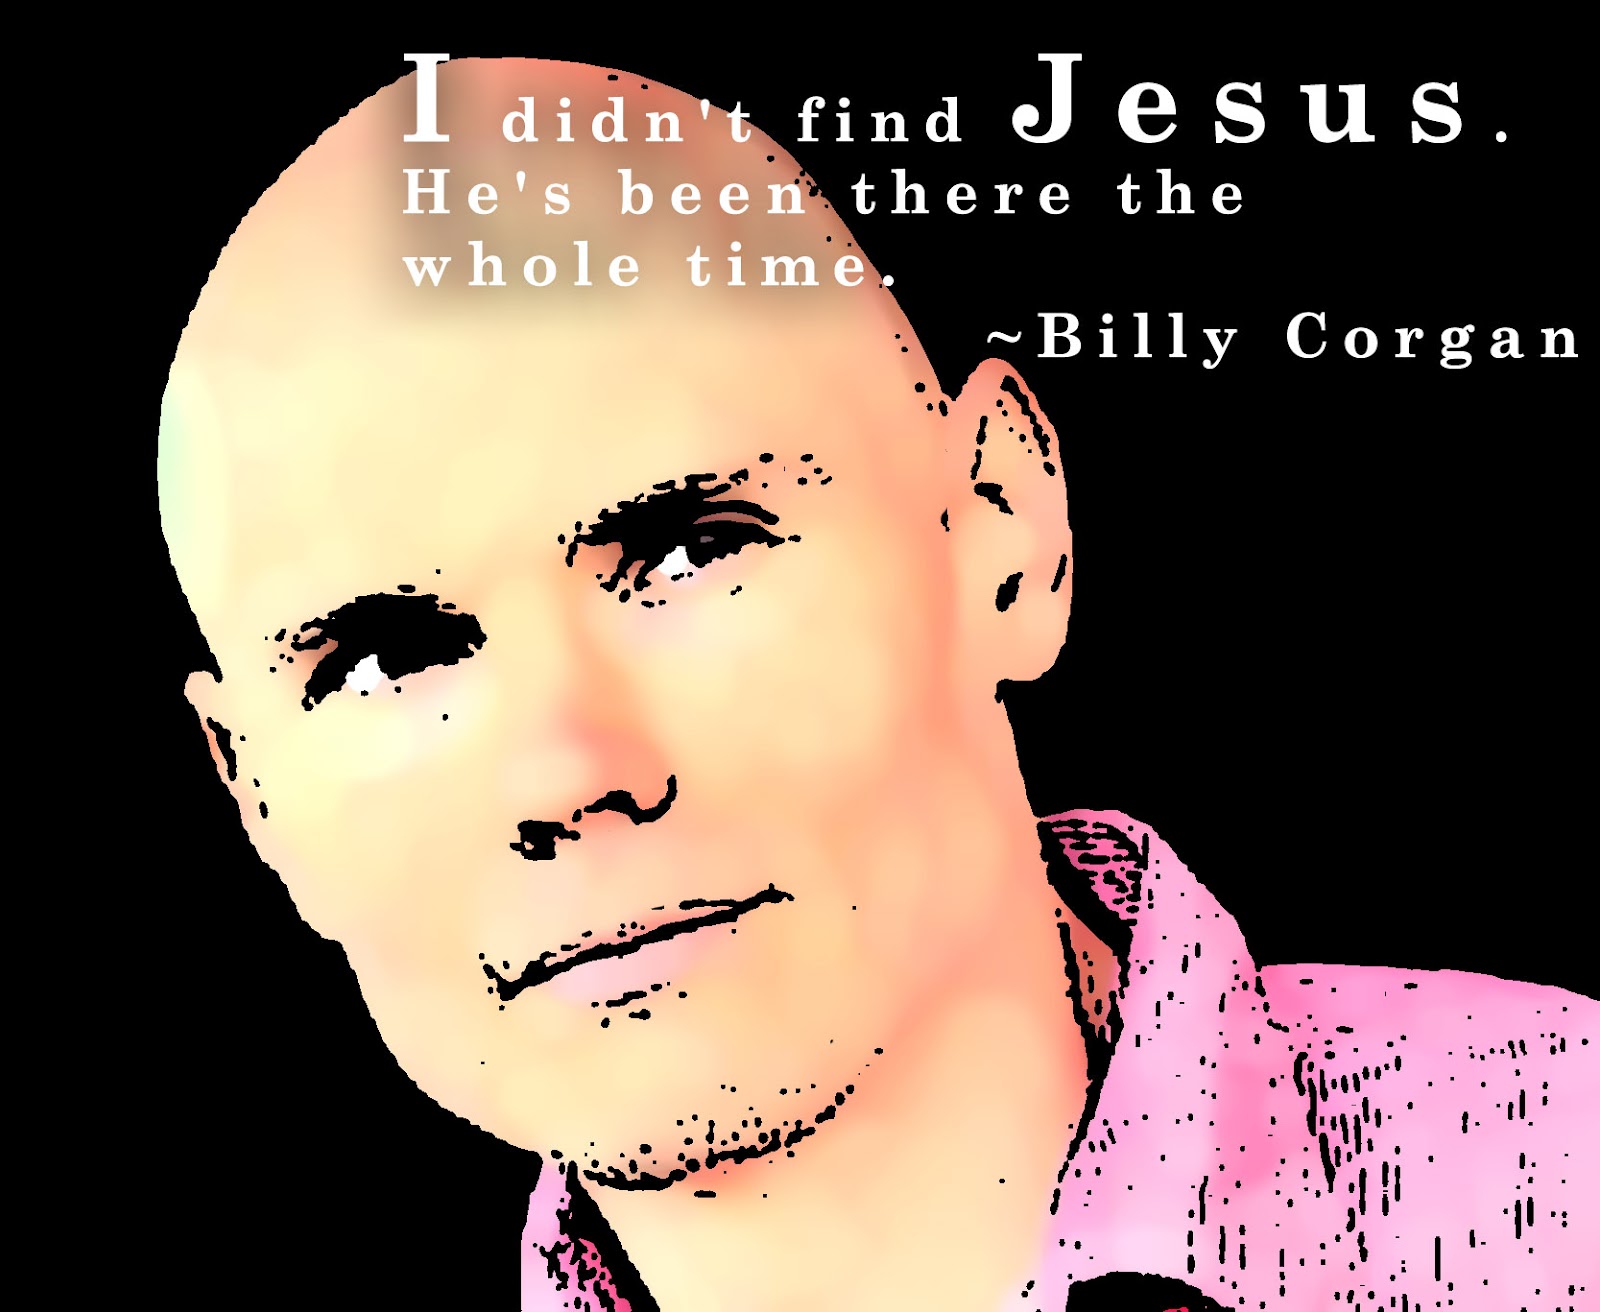 Billy Corgan's quote #1